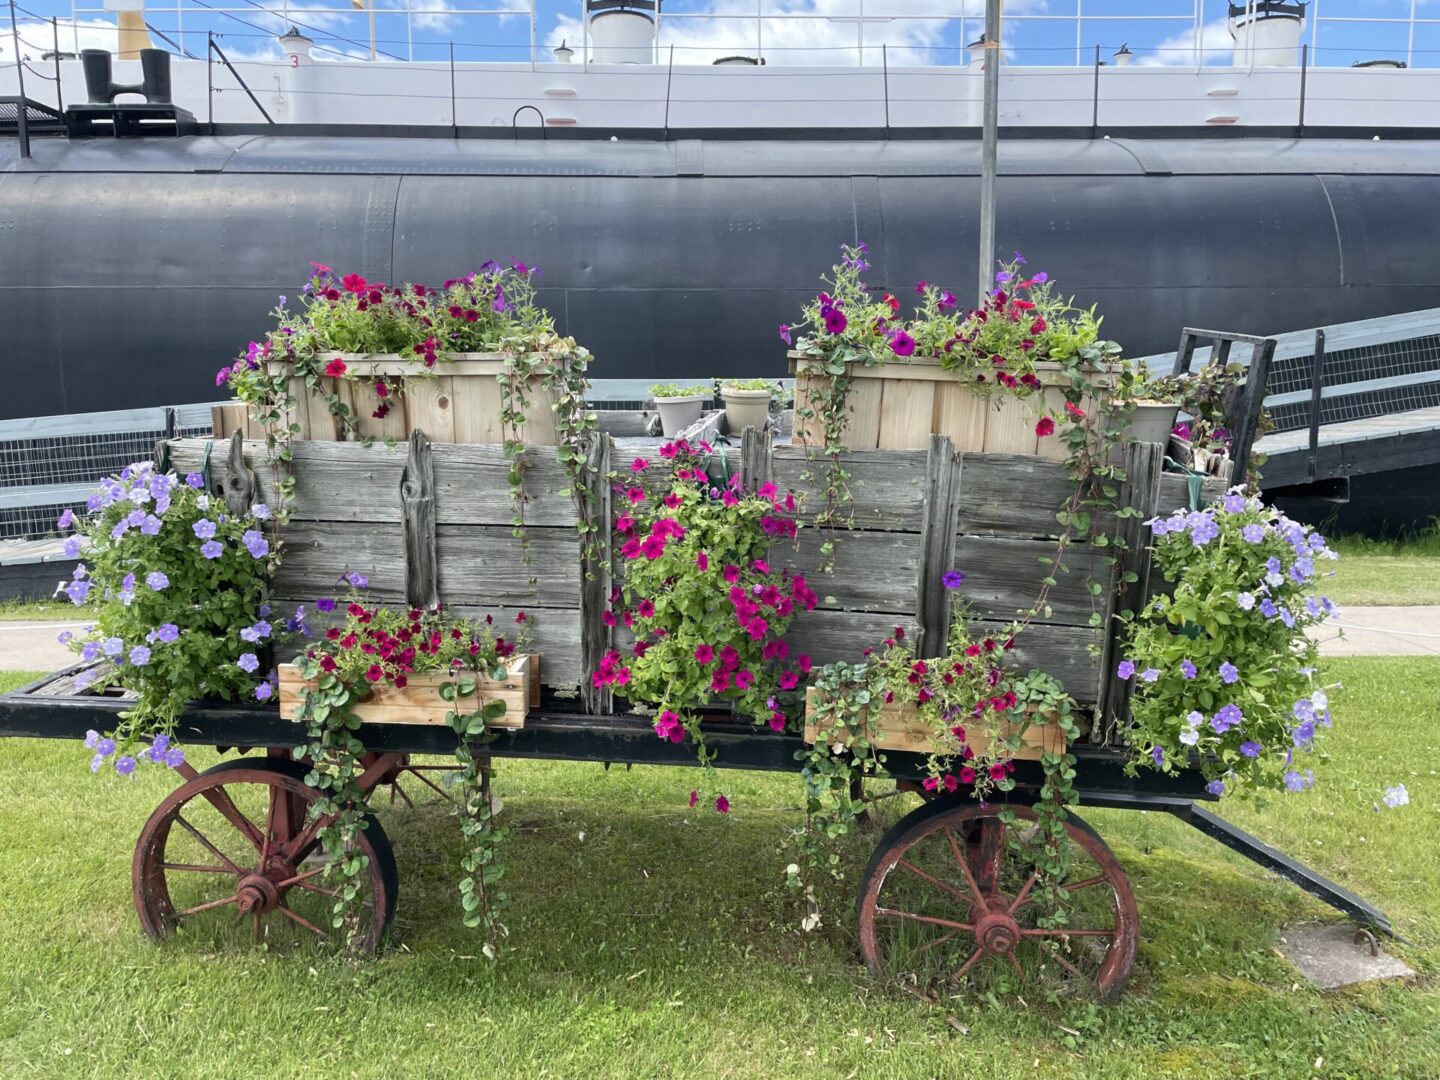 A couple of carts with flowers in them